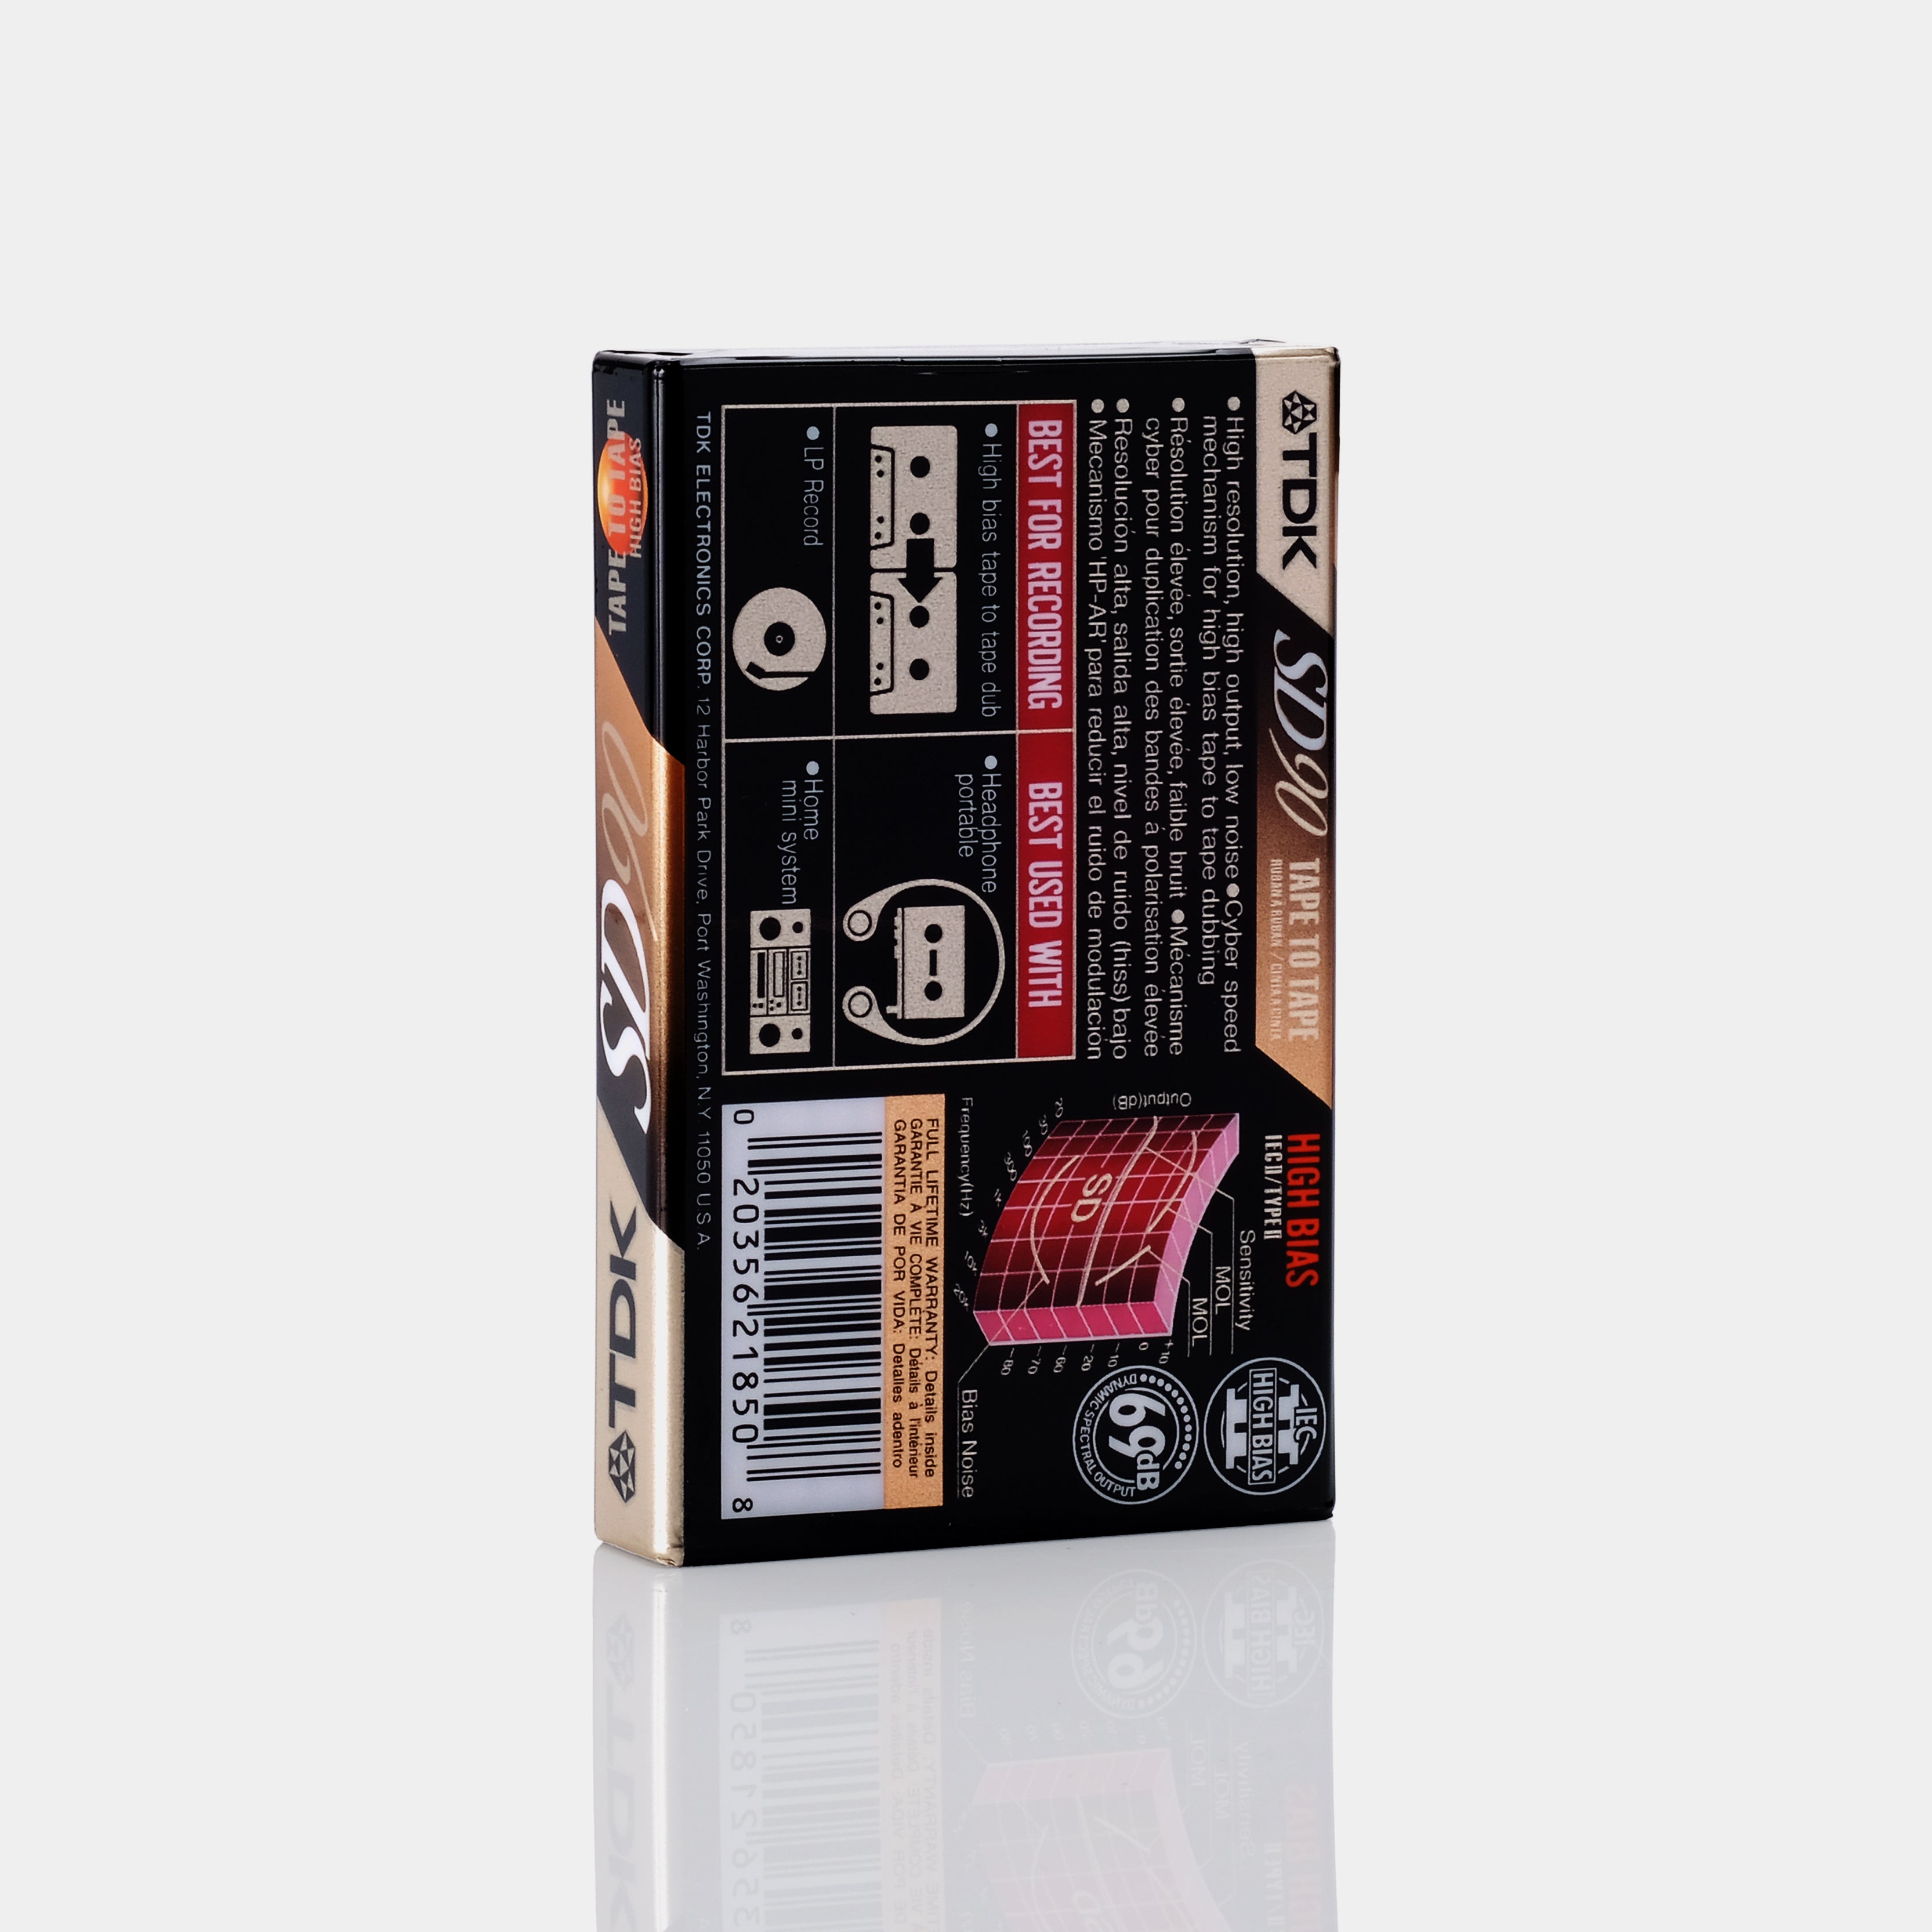 TDK SD90 Type II Blank Recordable Cassette Tape